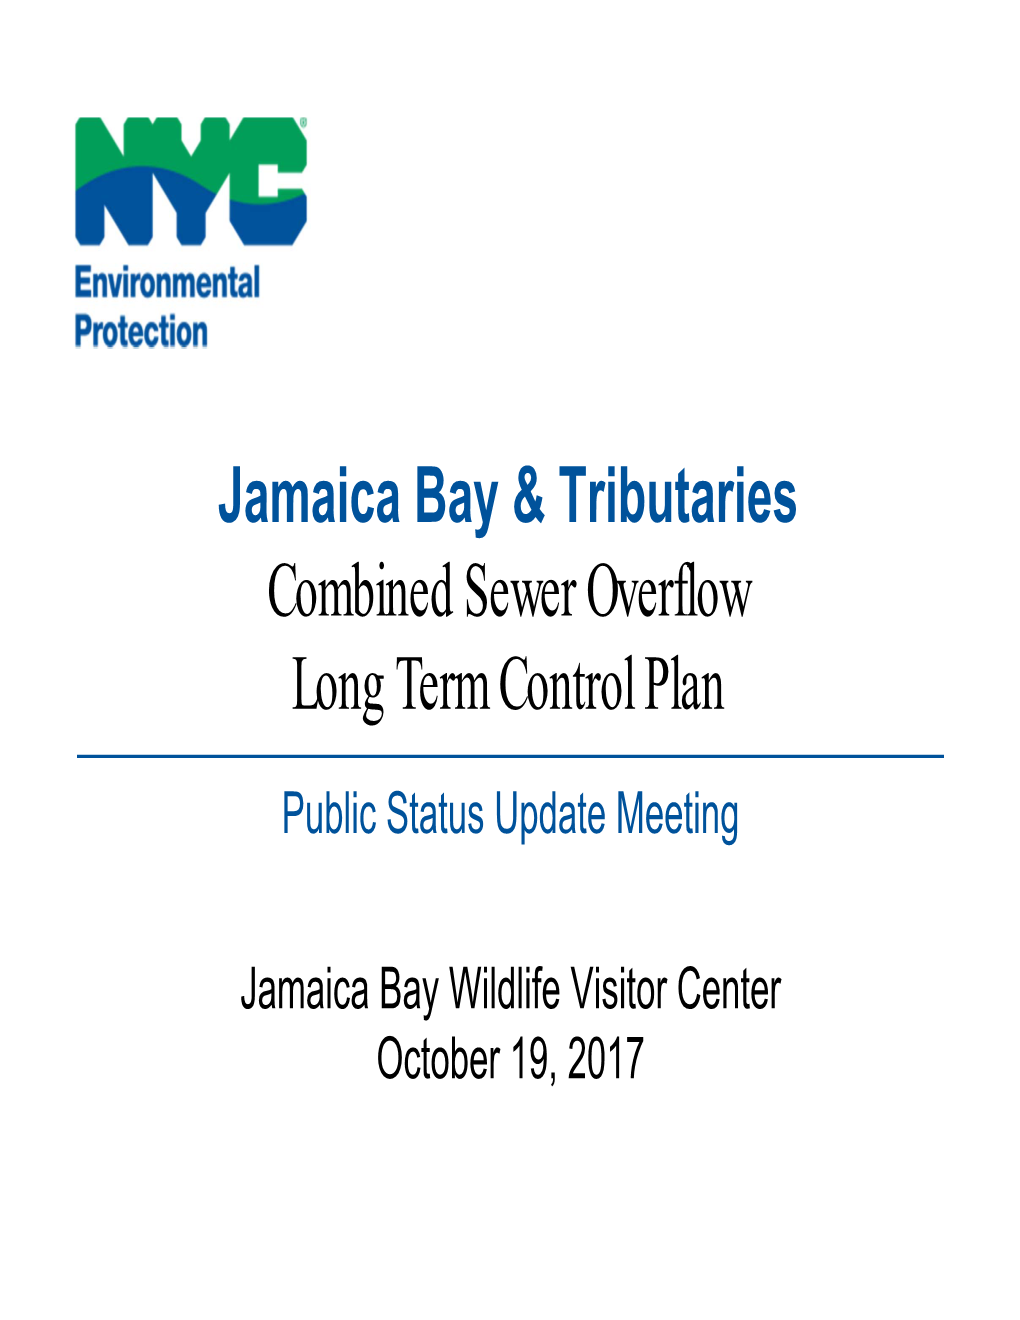 Download the Jamaica Bay LTCP Update Meeting Presentation